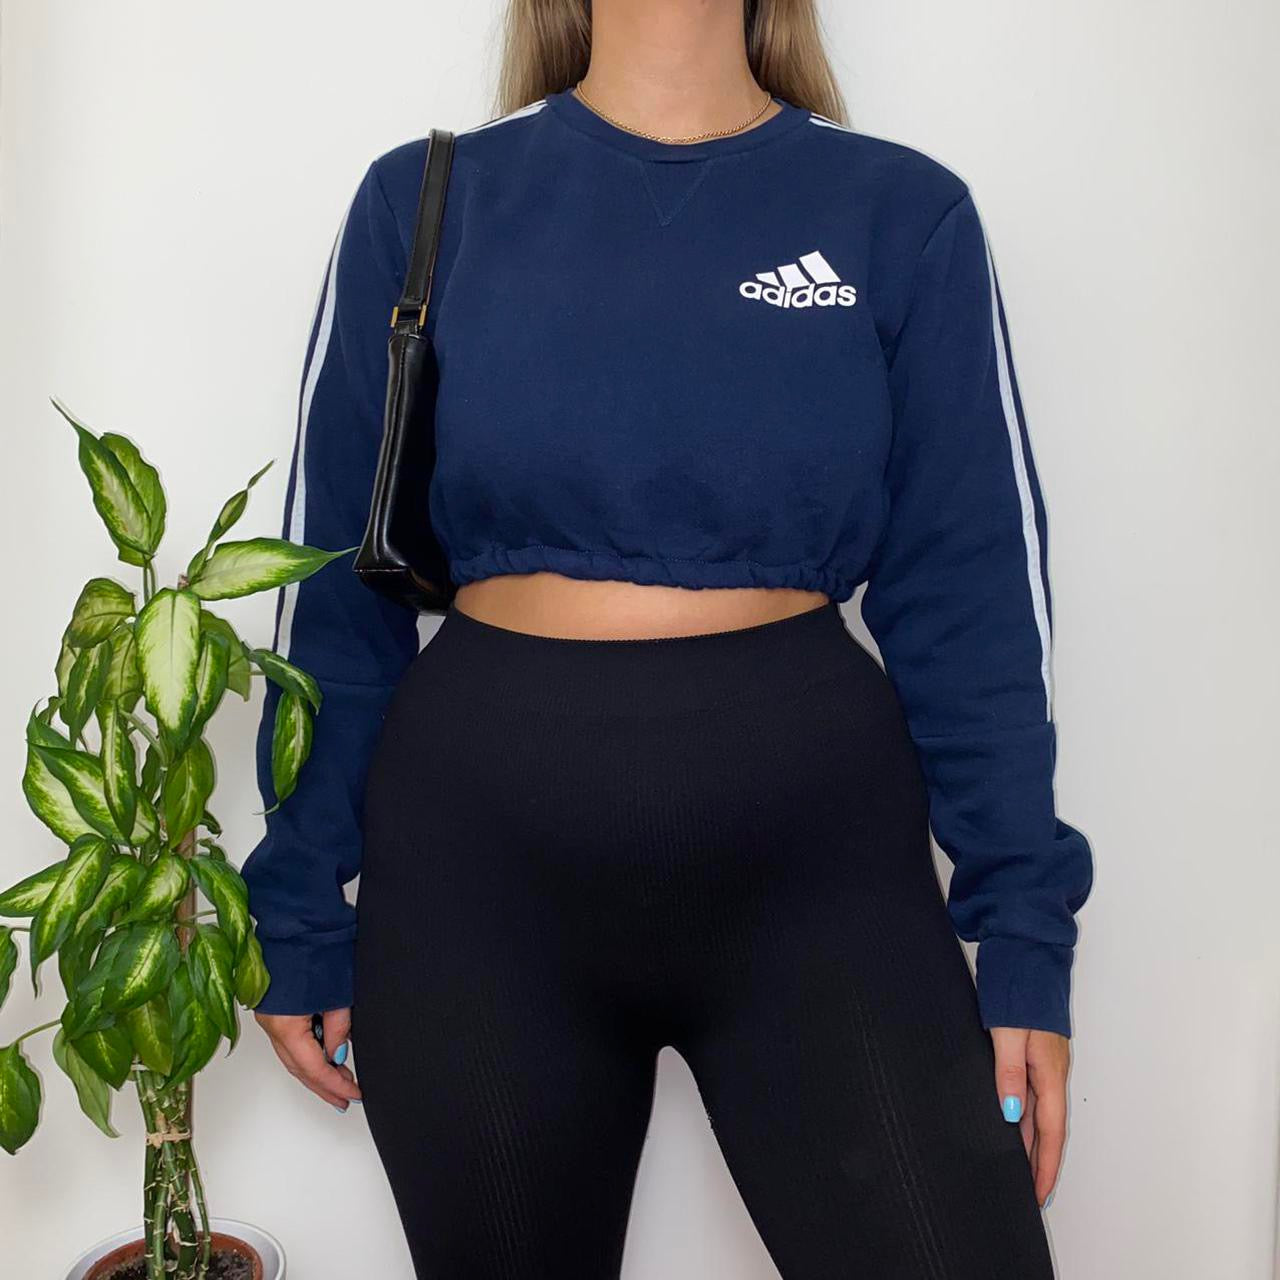 navy sweatshirt with small adidas text and symbol logo on chest with white 3 stripes on arms shown on model wearing black leggings and black shoulder bag